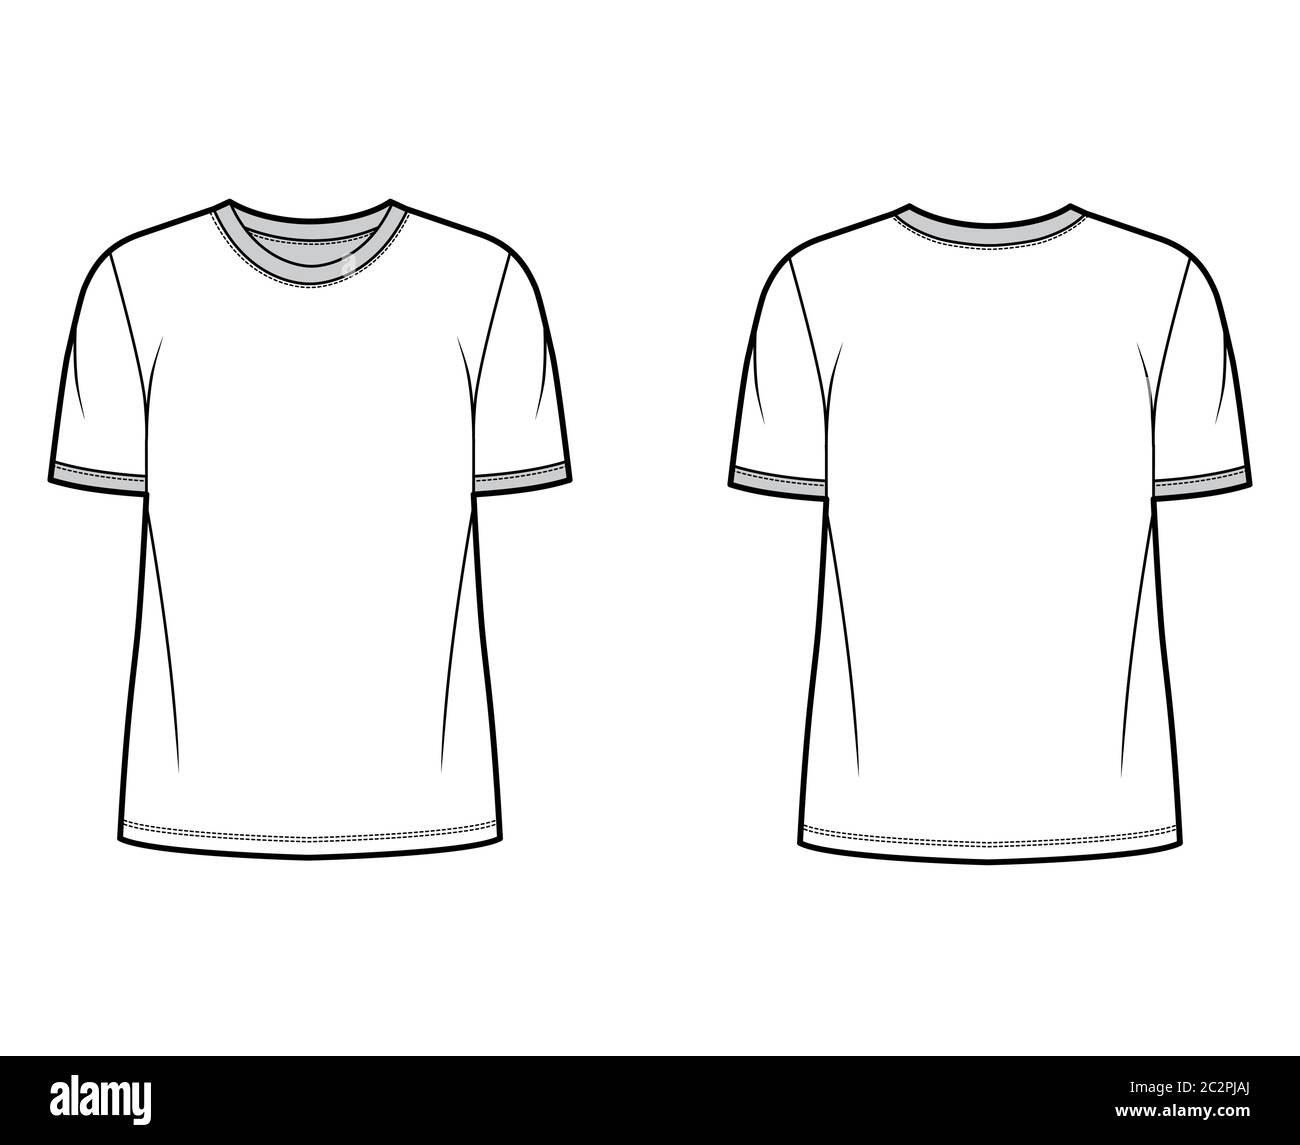 Download T Shirt Technical Fashion Illustration With Crew Neck Fitted Oversized Body Short Sleeves Flat Style Apparel Template Front And Back White Color Women And Men Unisex Garment Mockup For Designer Stock Vector Image